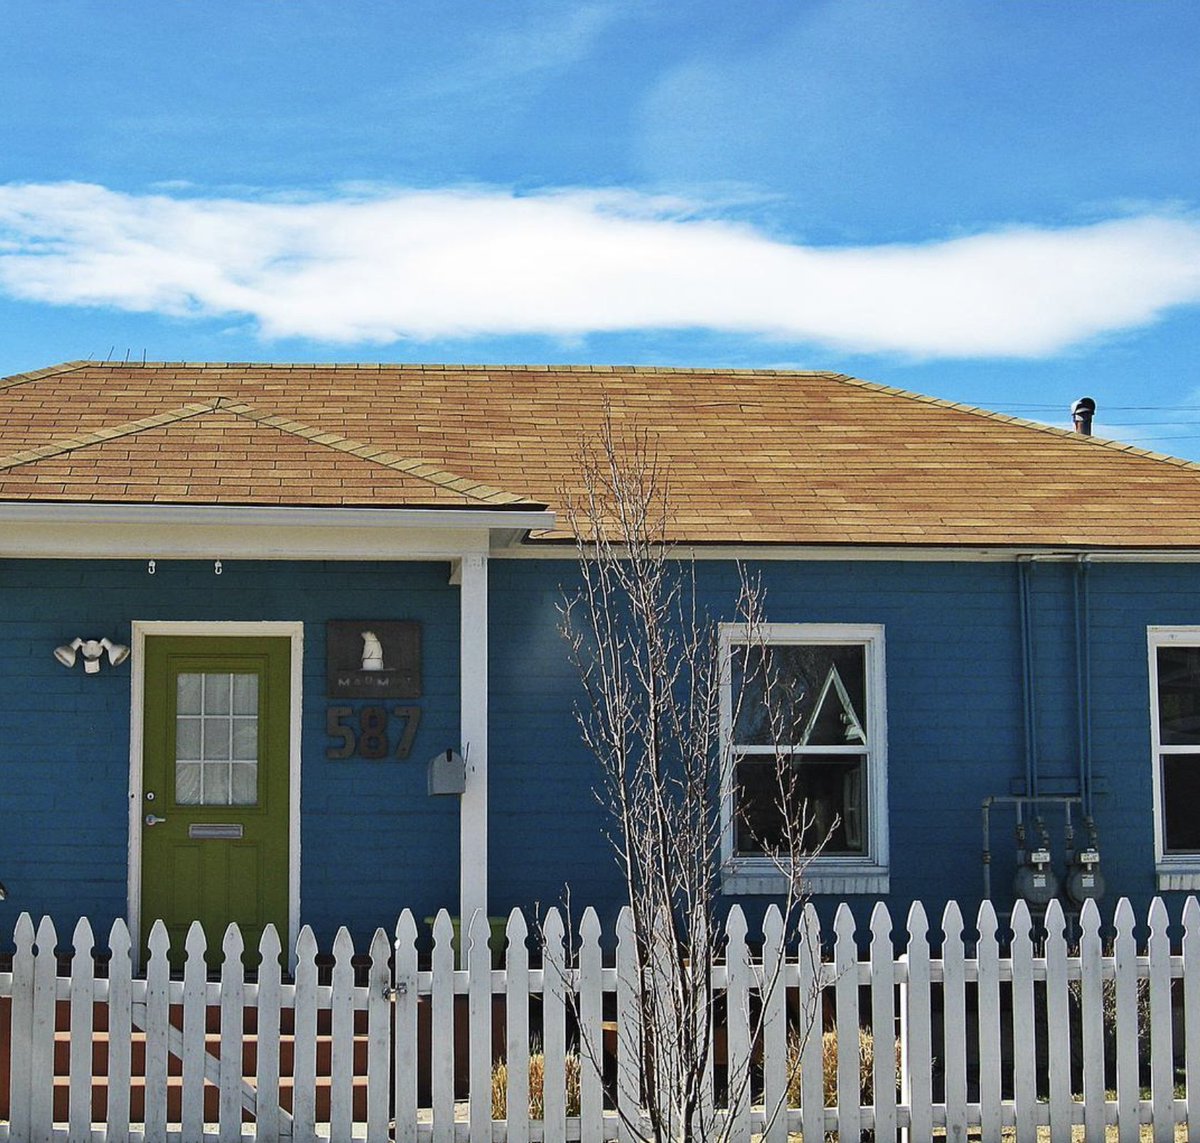 It doesn't just feel like owning a home in Washoe County is out of reach now, a new study shows we are again near the top of an undesirable ranking.

A recent report by moneygeek lists Washoe County as the third least affordable county in the US for a typical family.